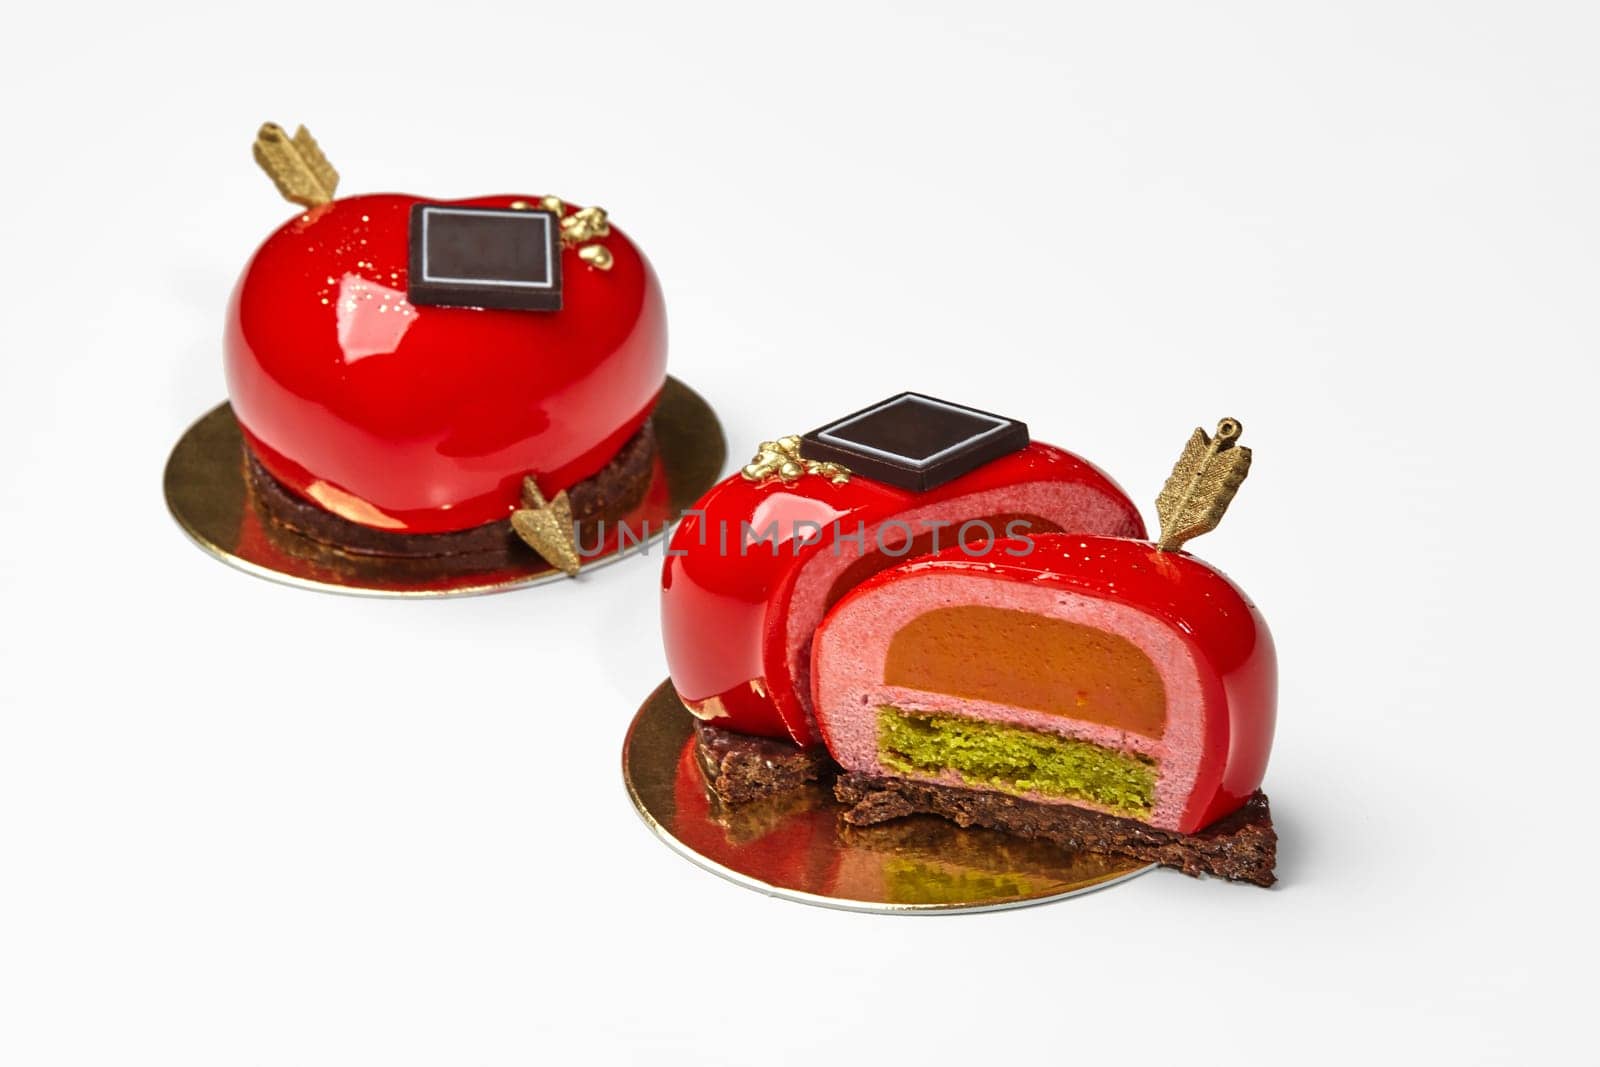 Delicate heart-shaped dessert of strawberry mousse with red glossy glaze, yogurt panna cotta and pistachio sponge layer decorated with gold arrow. Delicious romantic gift for Valentines Day